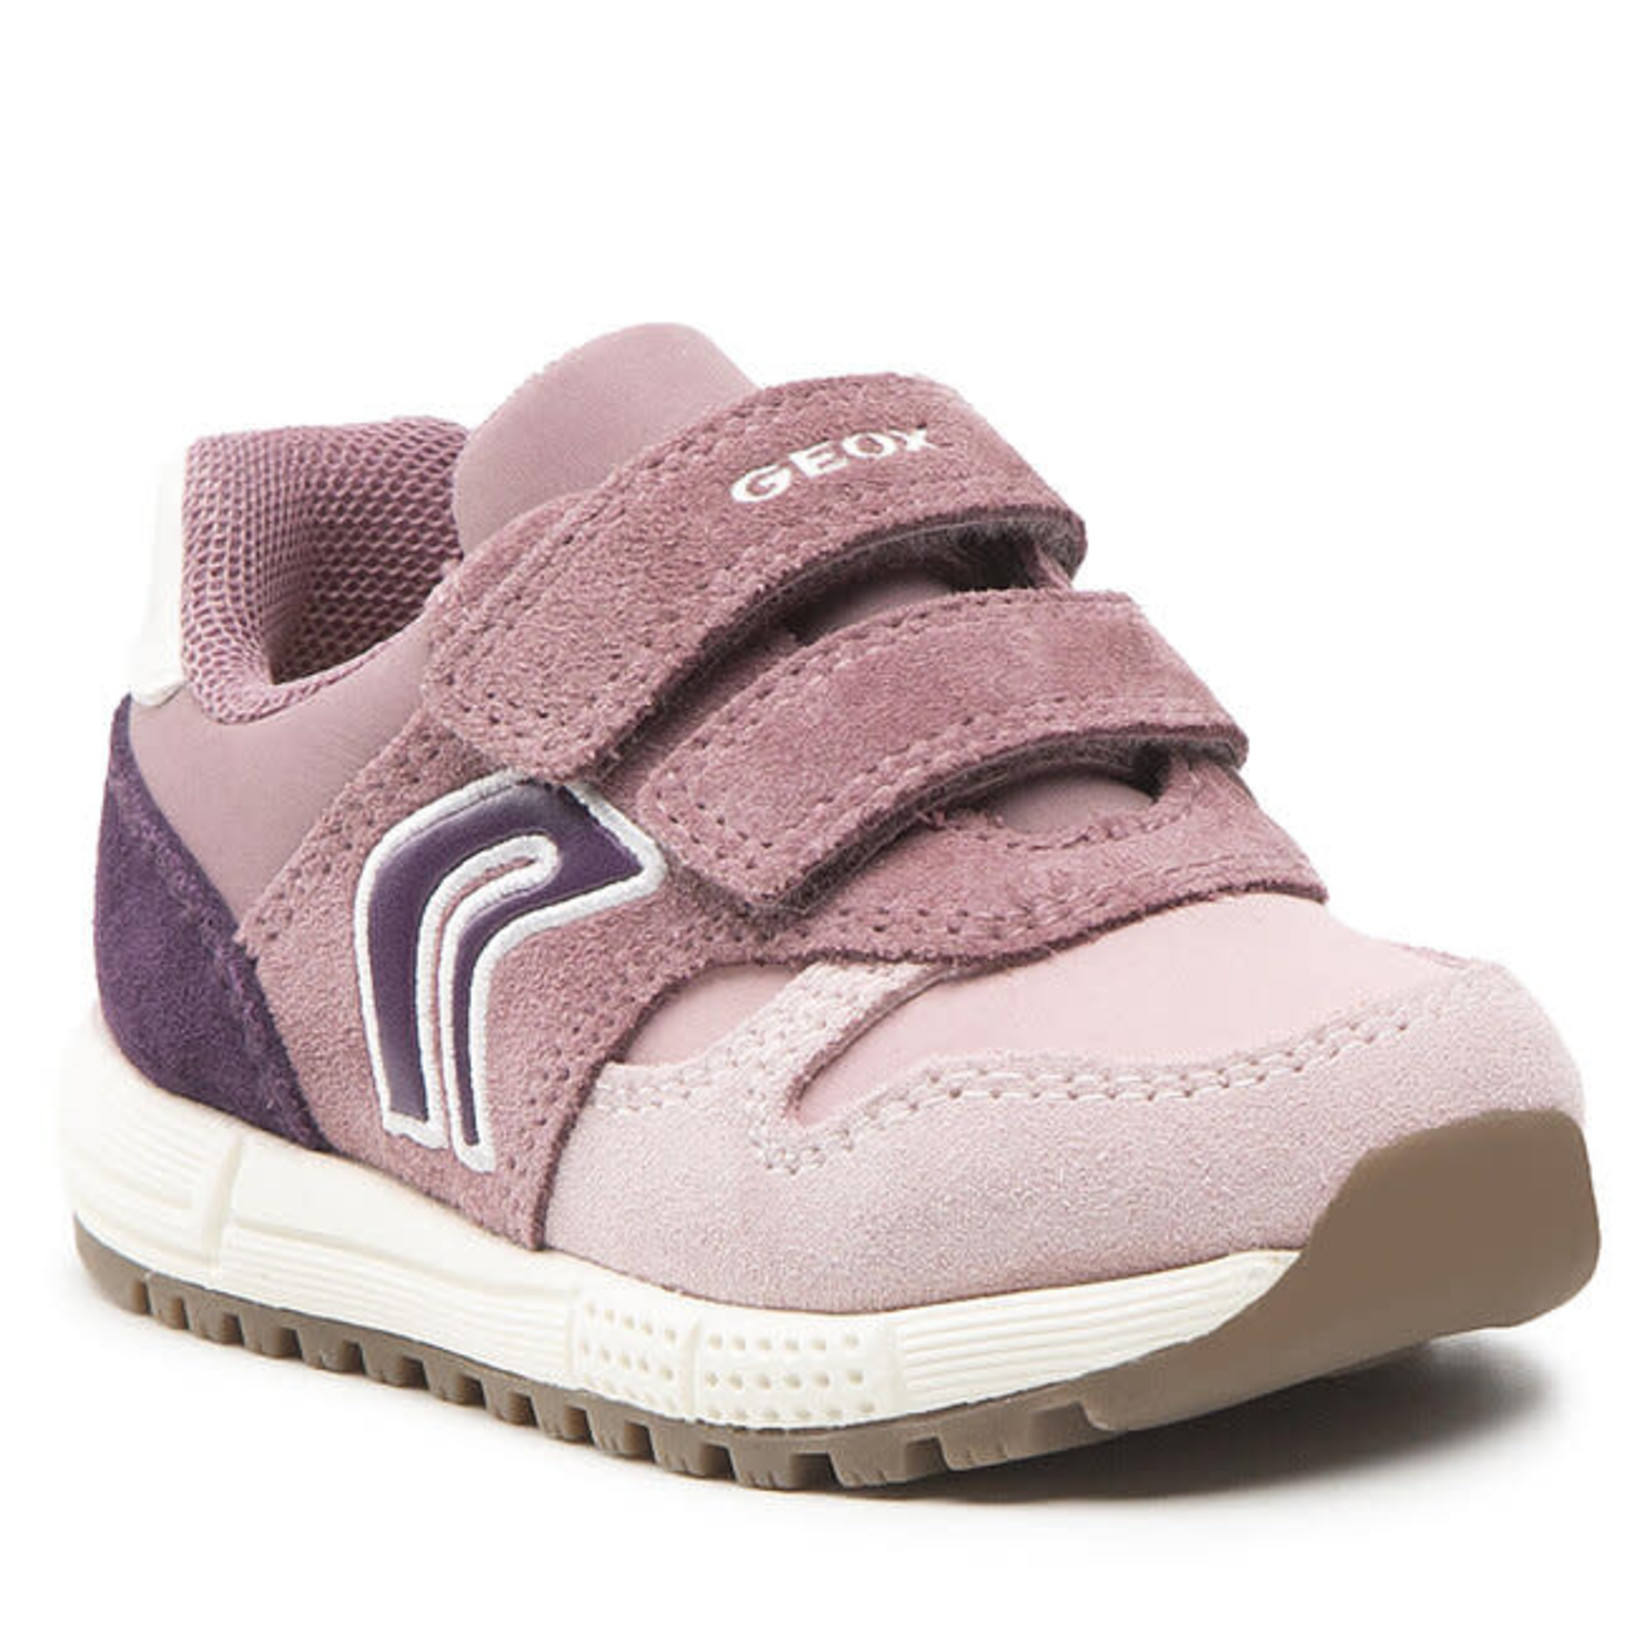 Geox GEOX - Sports shoes 'B. Alben - Suede and Nylon' - Rose/Purple'